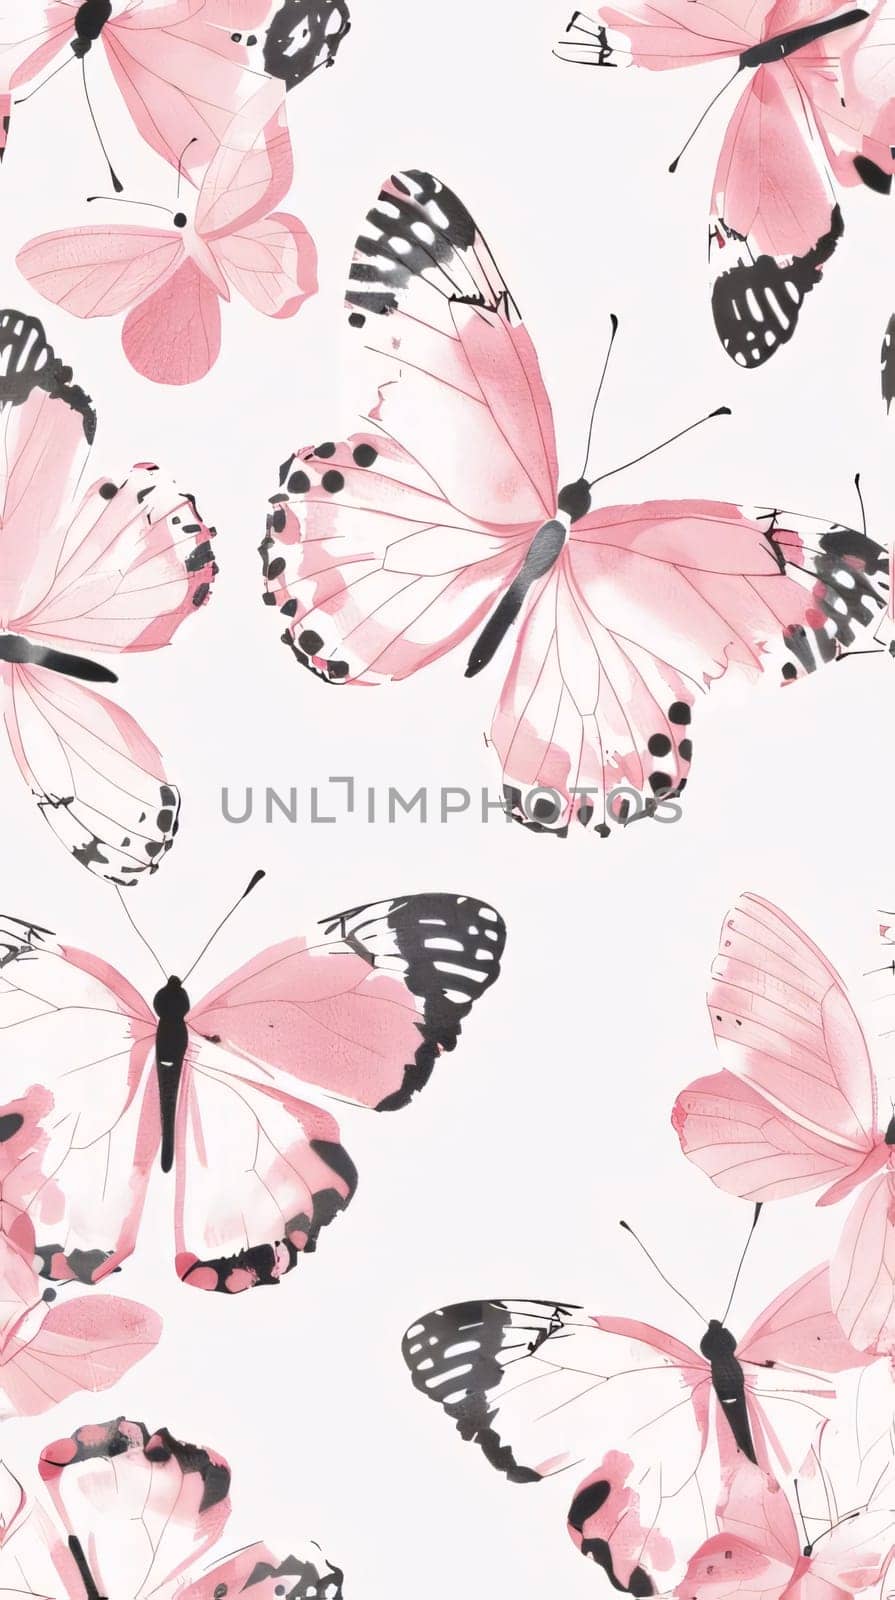 Beautiful spring illustration: Seamless pattern with pink butterflies on white background. Vector illustration.